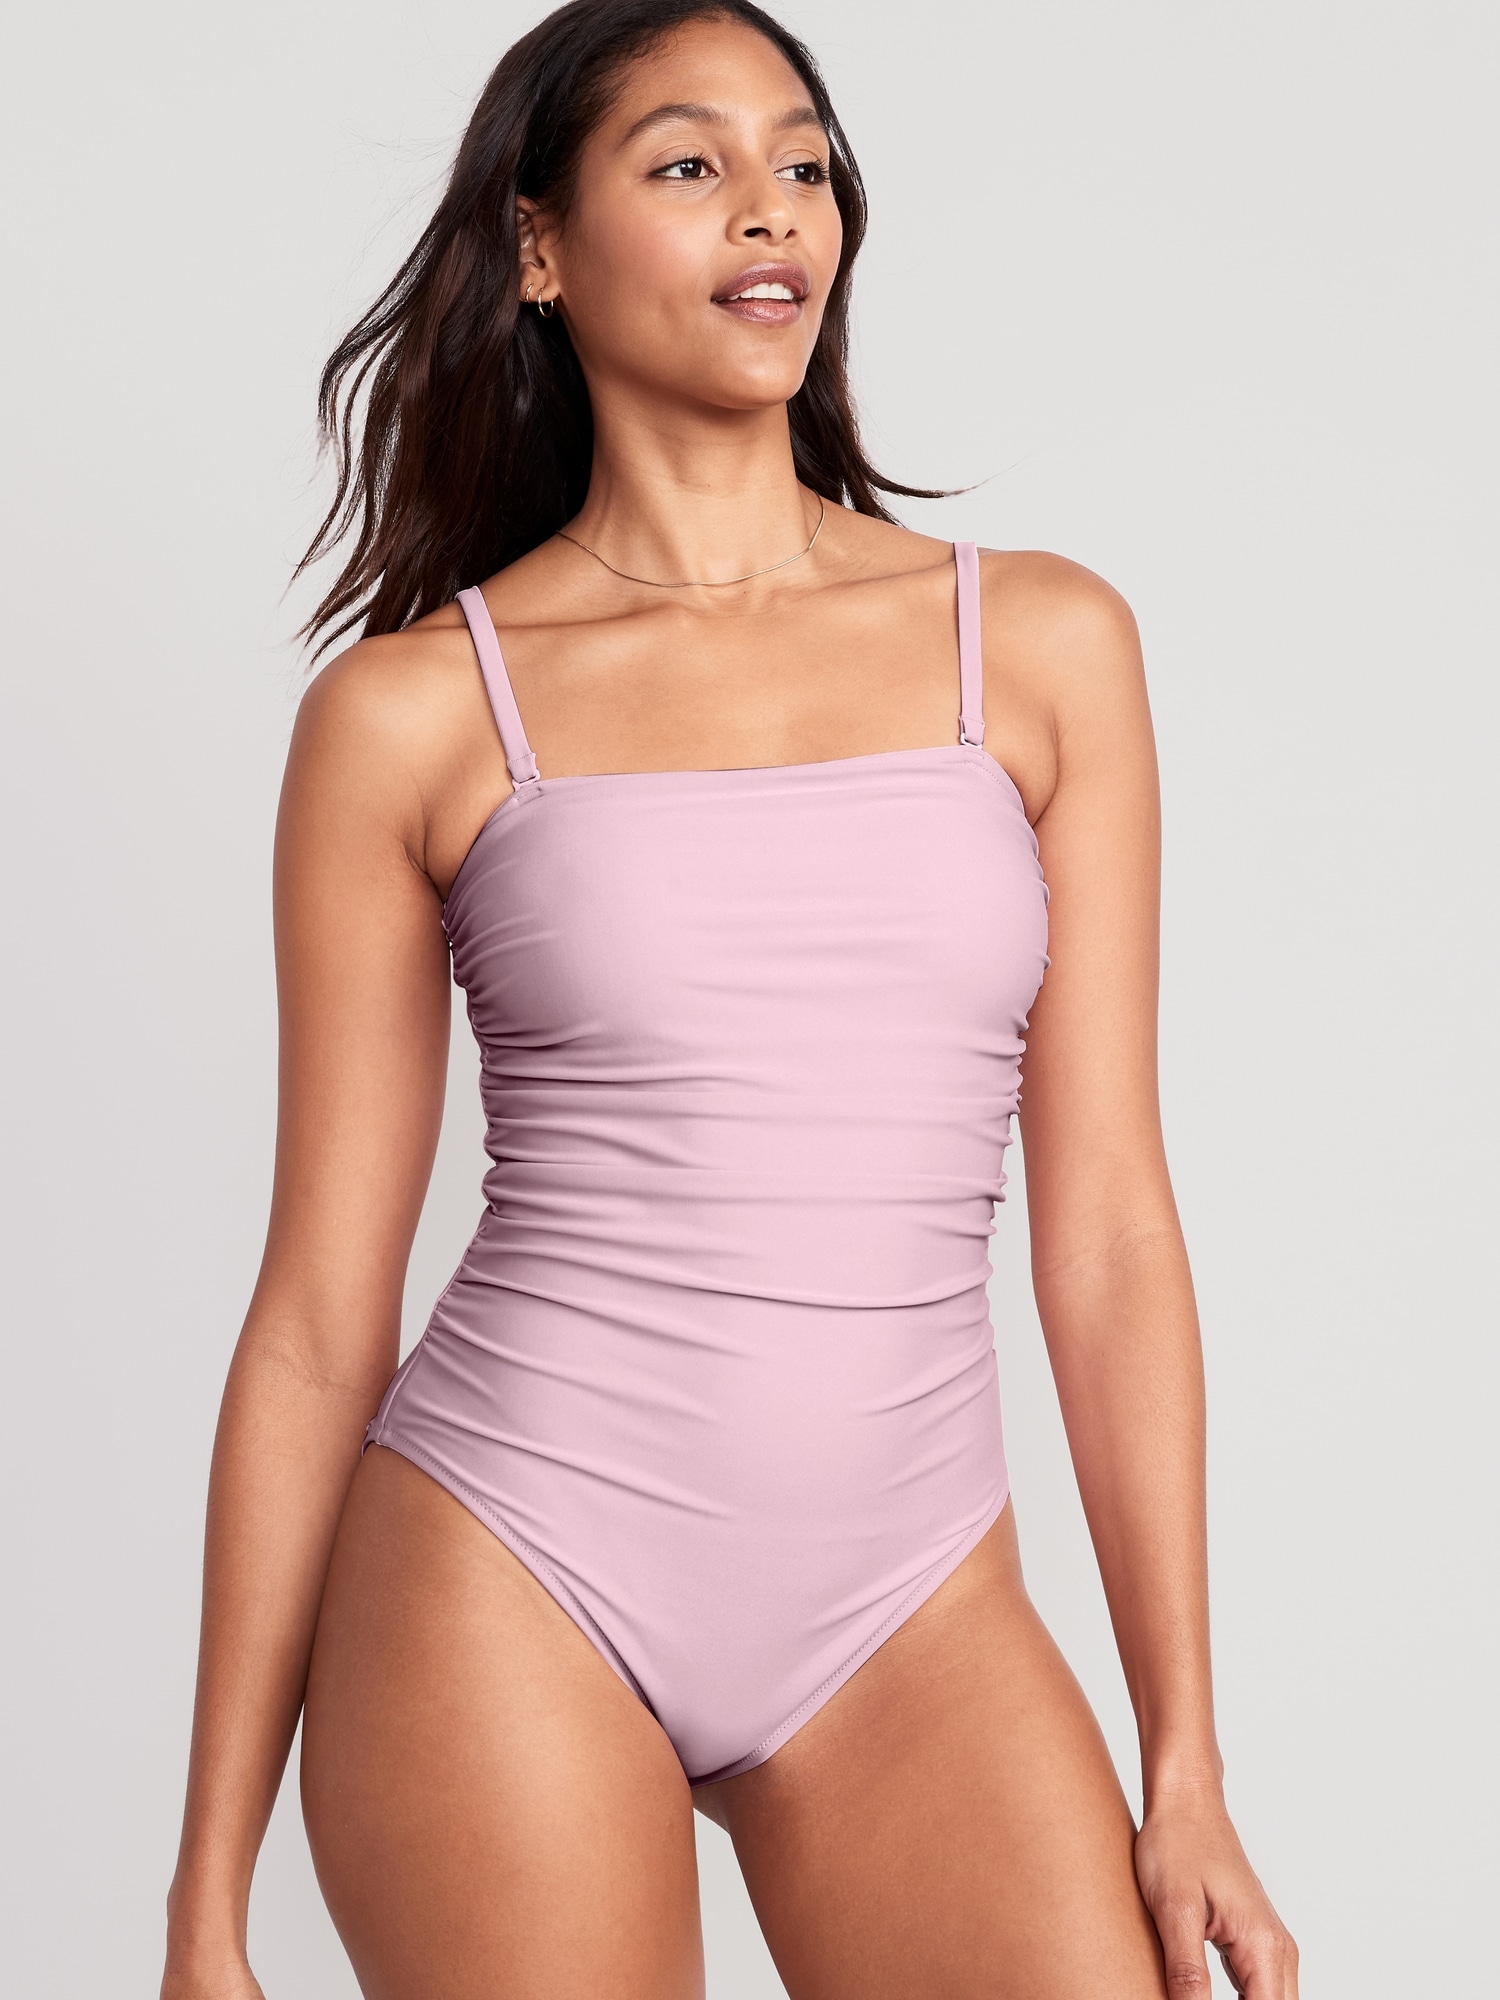 Old Navy Convertible Bandeau One-Piece Swimsuit for Women purple. 1